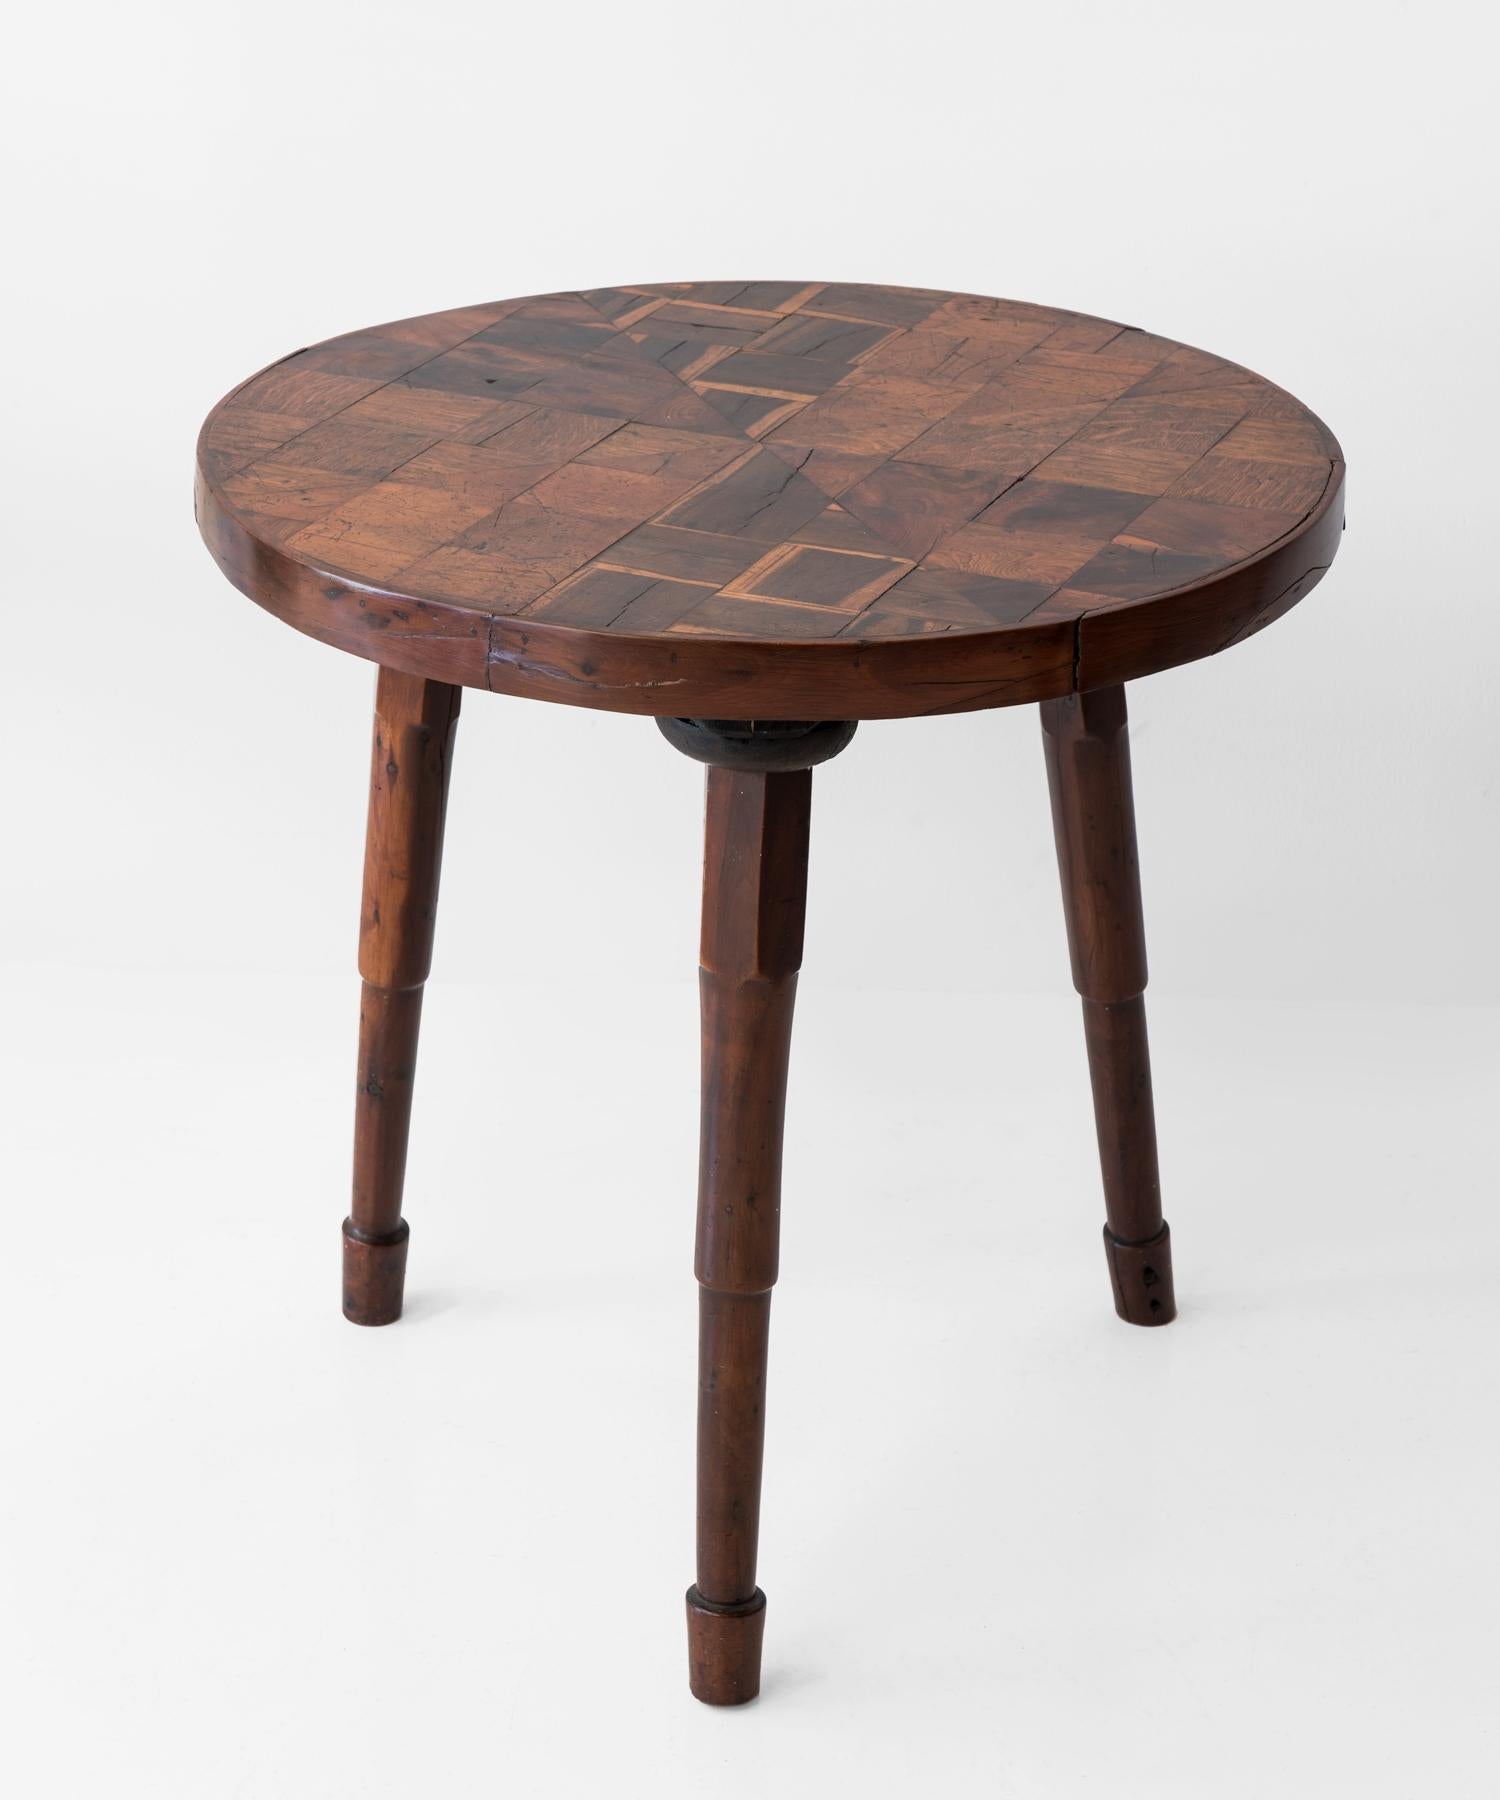 Circular top with radial parquetry in oak, laburnum and walnut on chamfered solid yew wood legs.
   